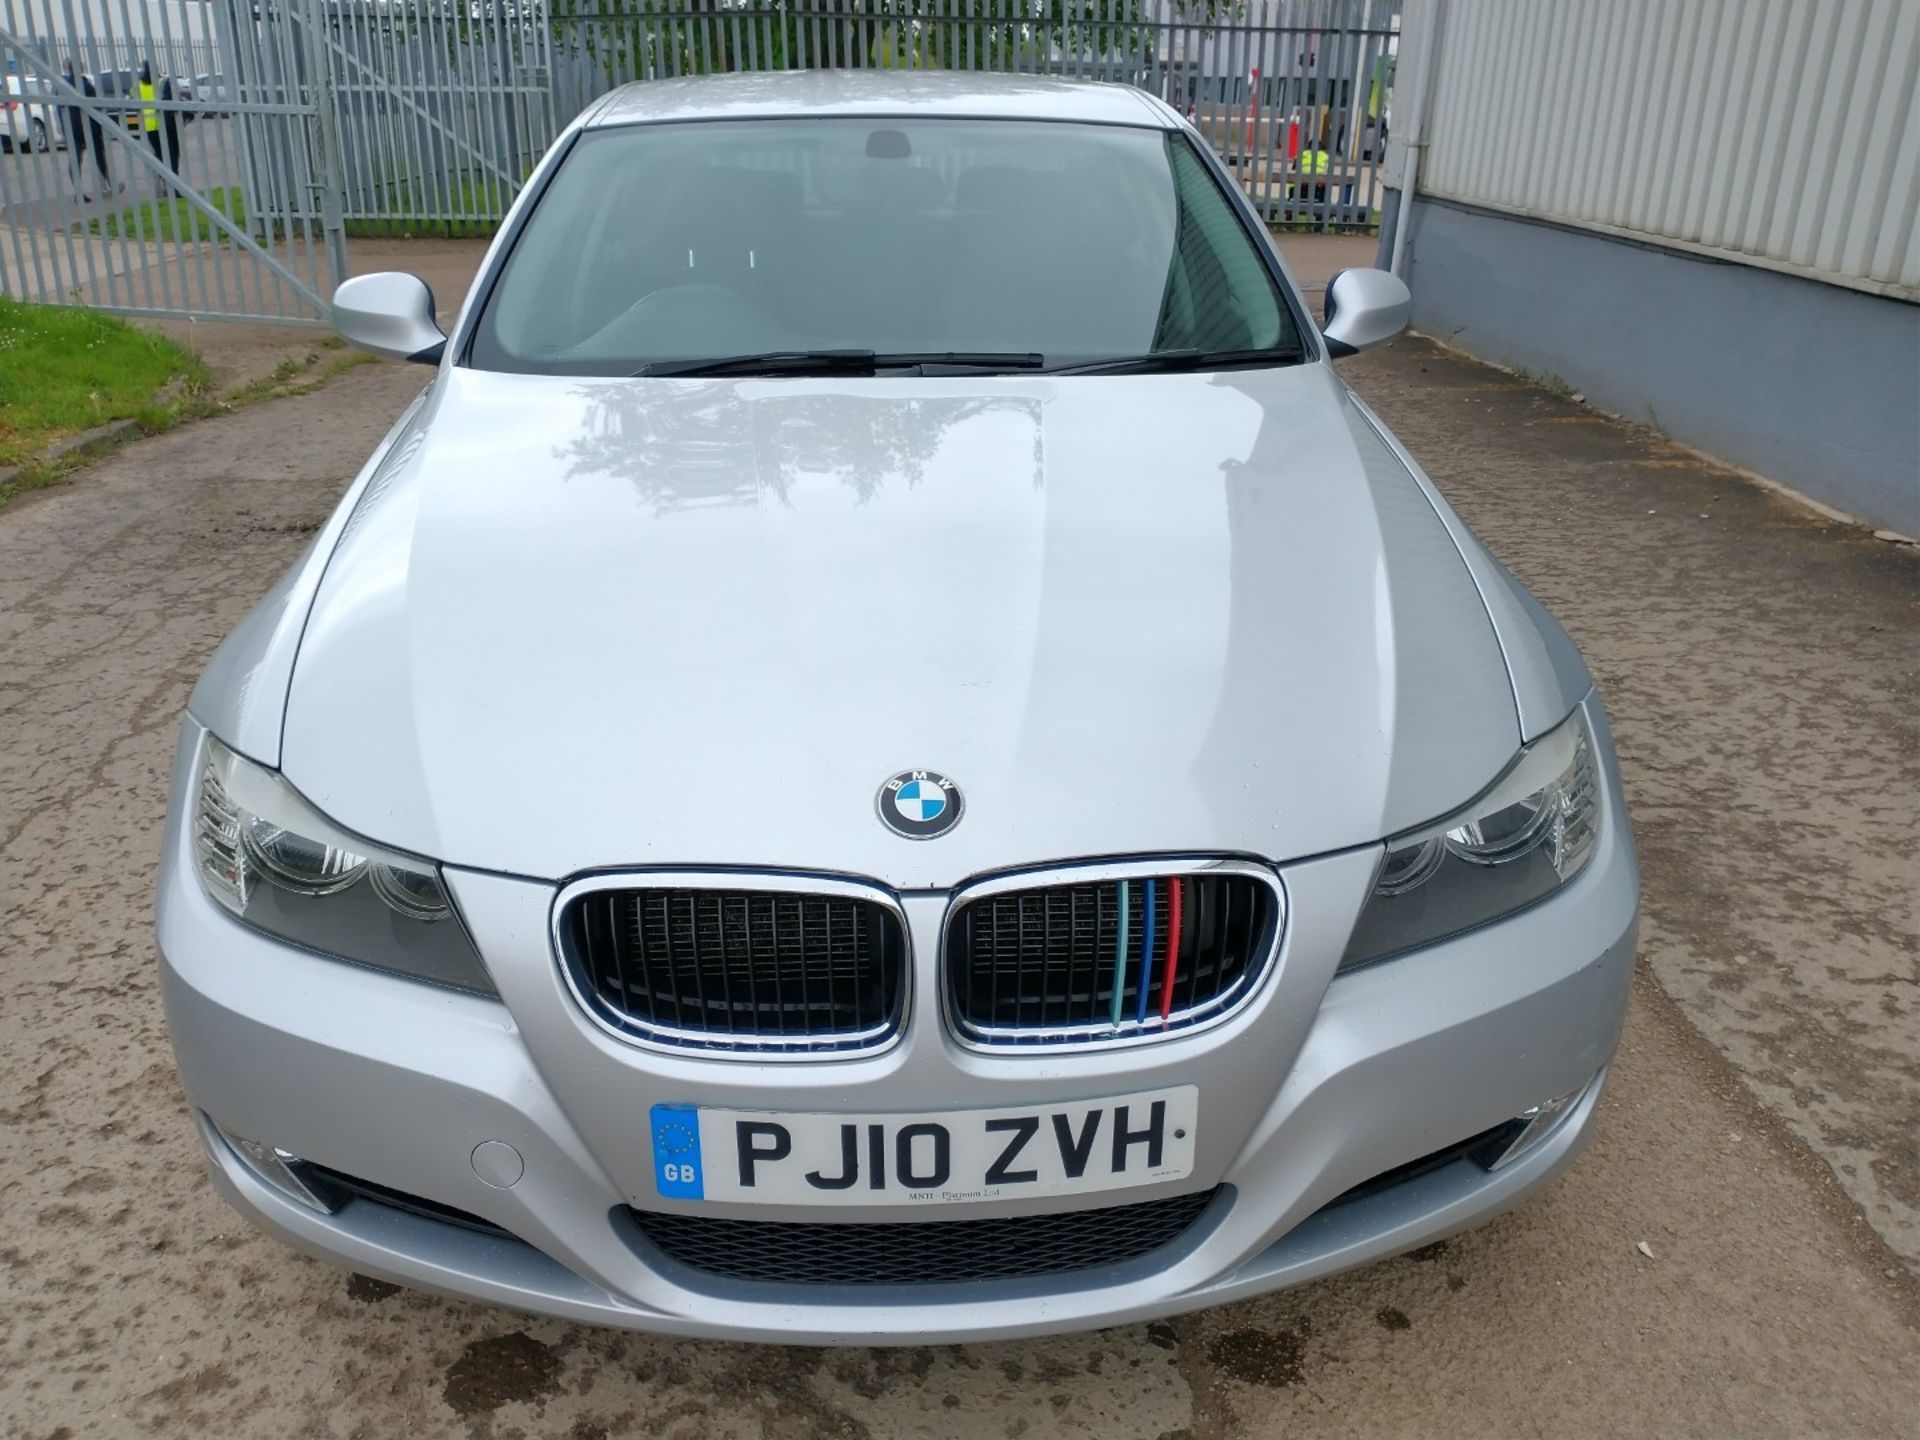 2010 BMW 316D ES 5dr Saloon 2.0 Diesel - CL505 - NO VAT ON THE HAMMER - Location: Corby - Image 14 of 18